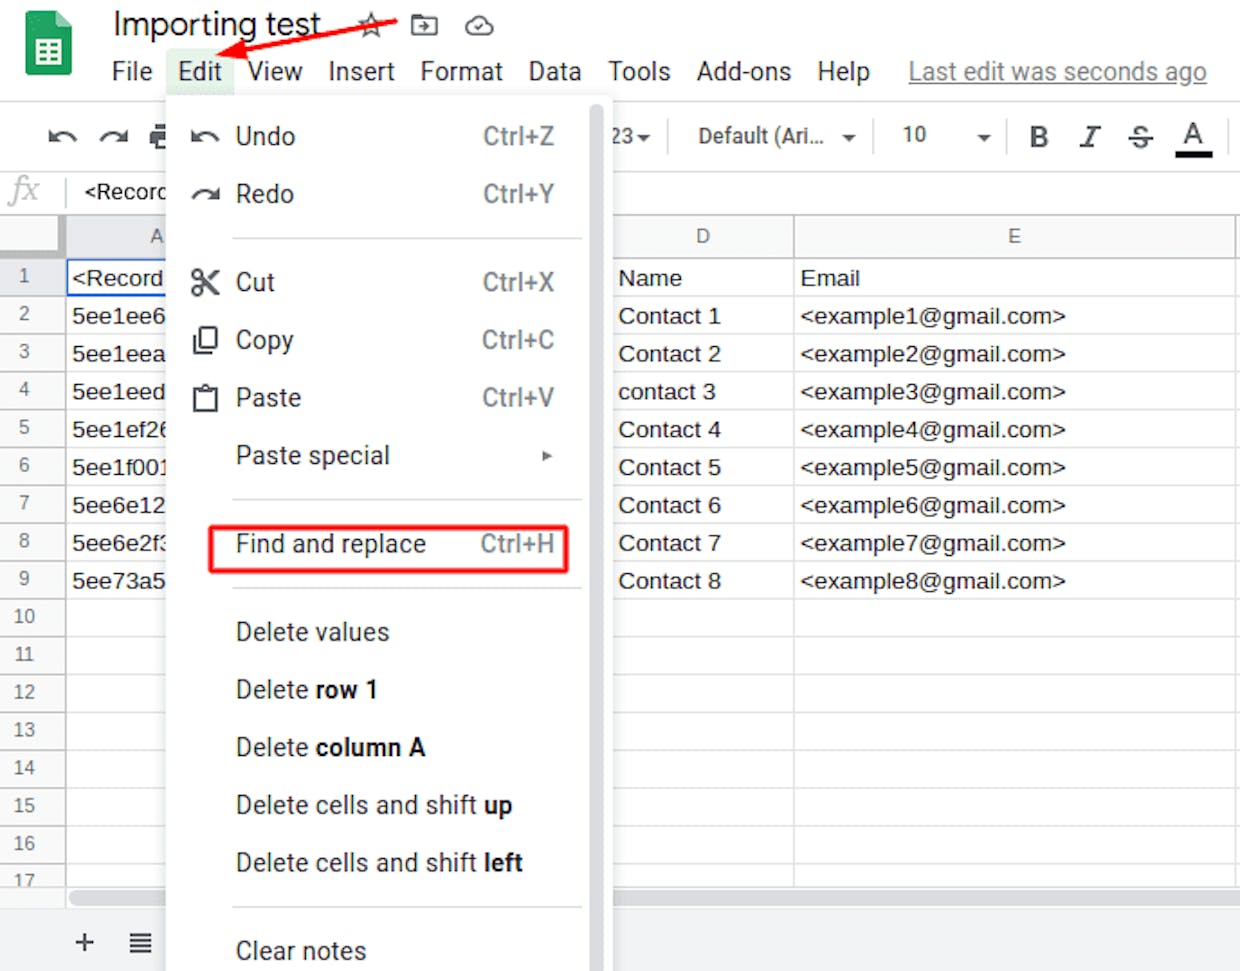 Right now when I export/import spreadsheets I have to manually format the emails, URL's, Phone numbers, etc into standard form or it causes tons of data issues. For example, NetHunt uses <example@gmail.com> for emails, & adds an extra "/" at the end of Linkedin Url's. Is there anyway to change or remove the formatting? 